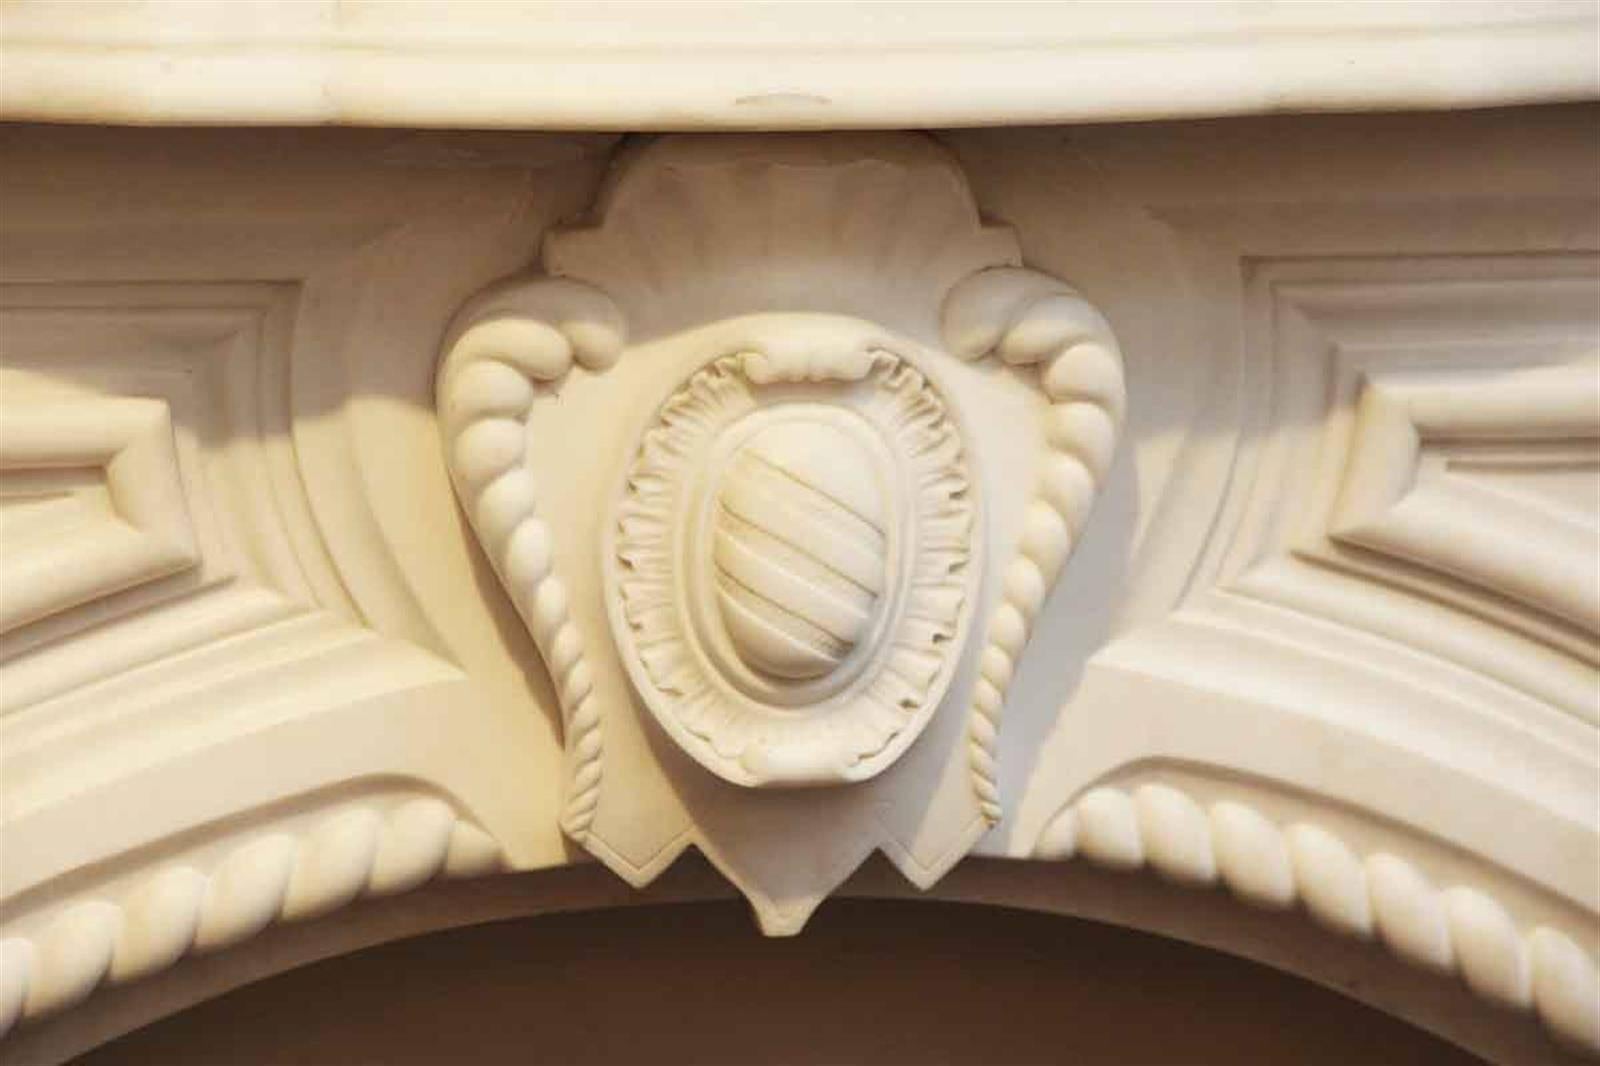 American 1905 Heavily Carved White Marble Rope Design Mantel from the West Village